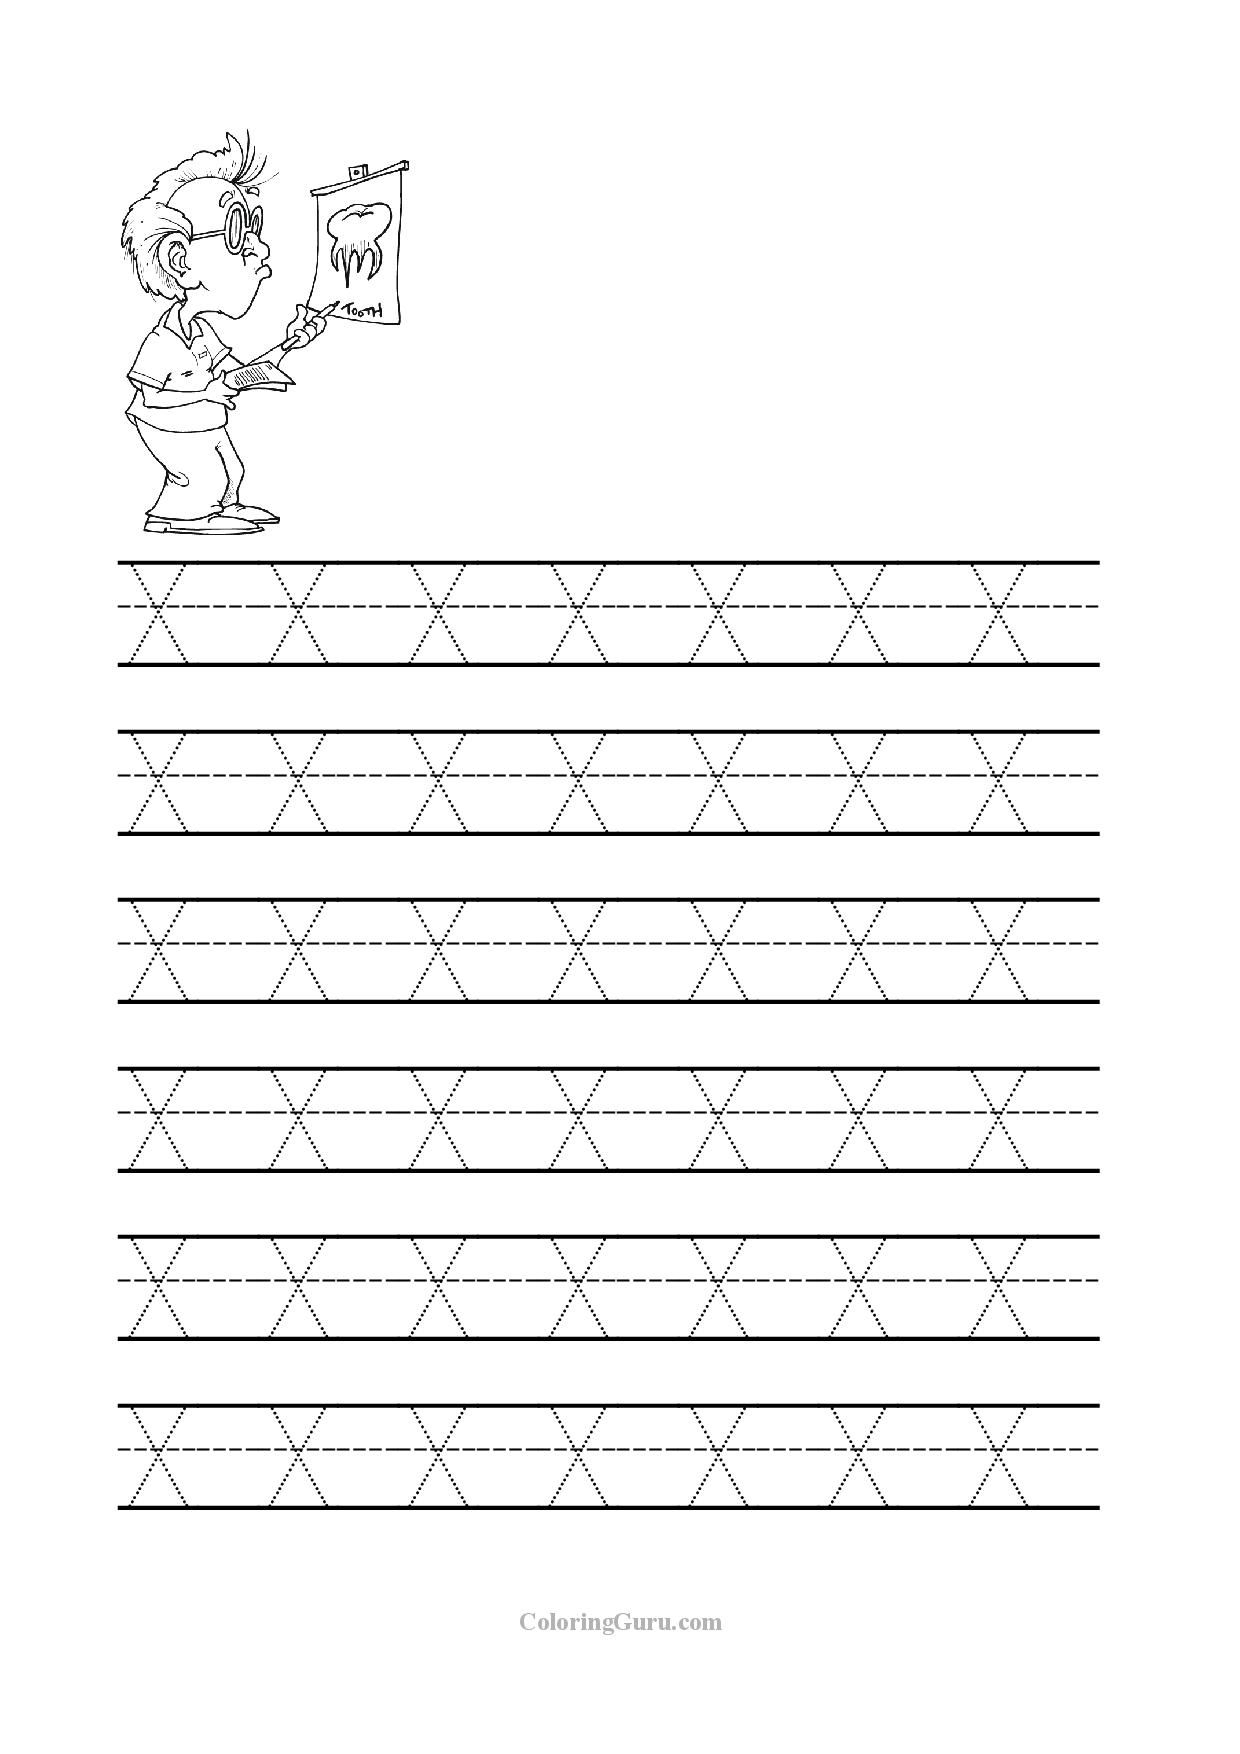 Free Printable Tracing Letter X Worksheets For Preschool intended for Tracing Letter X Worksheets